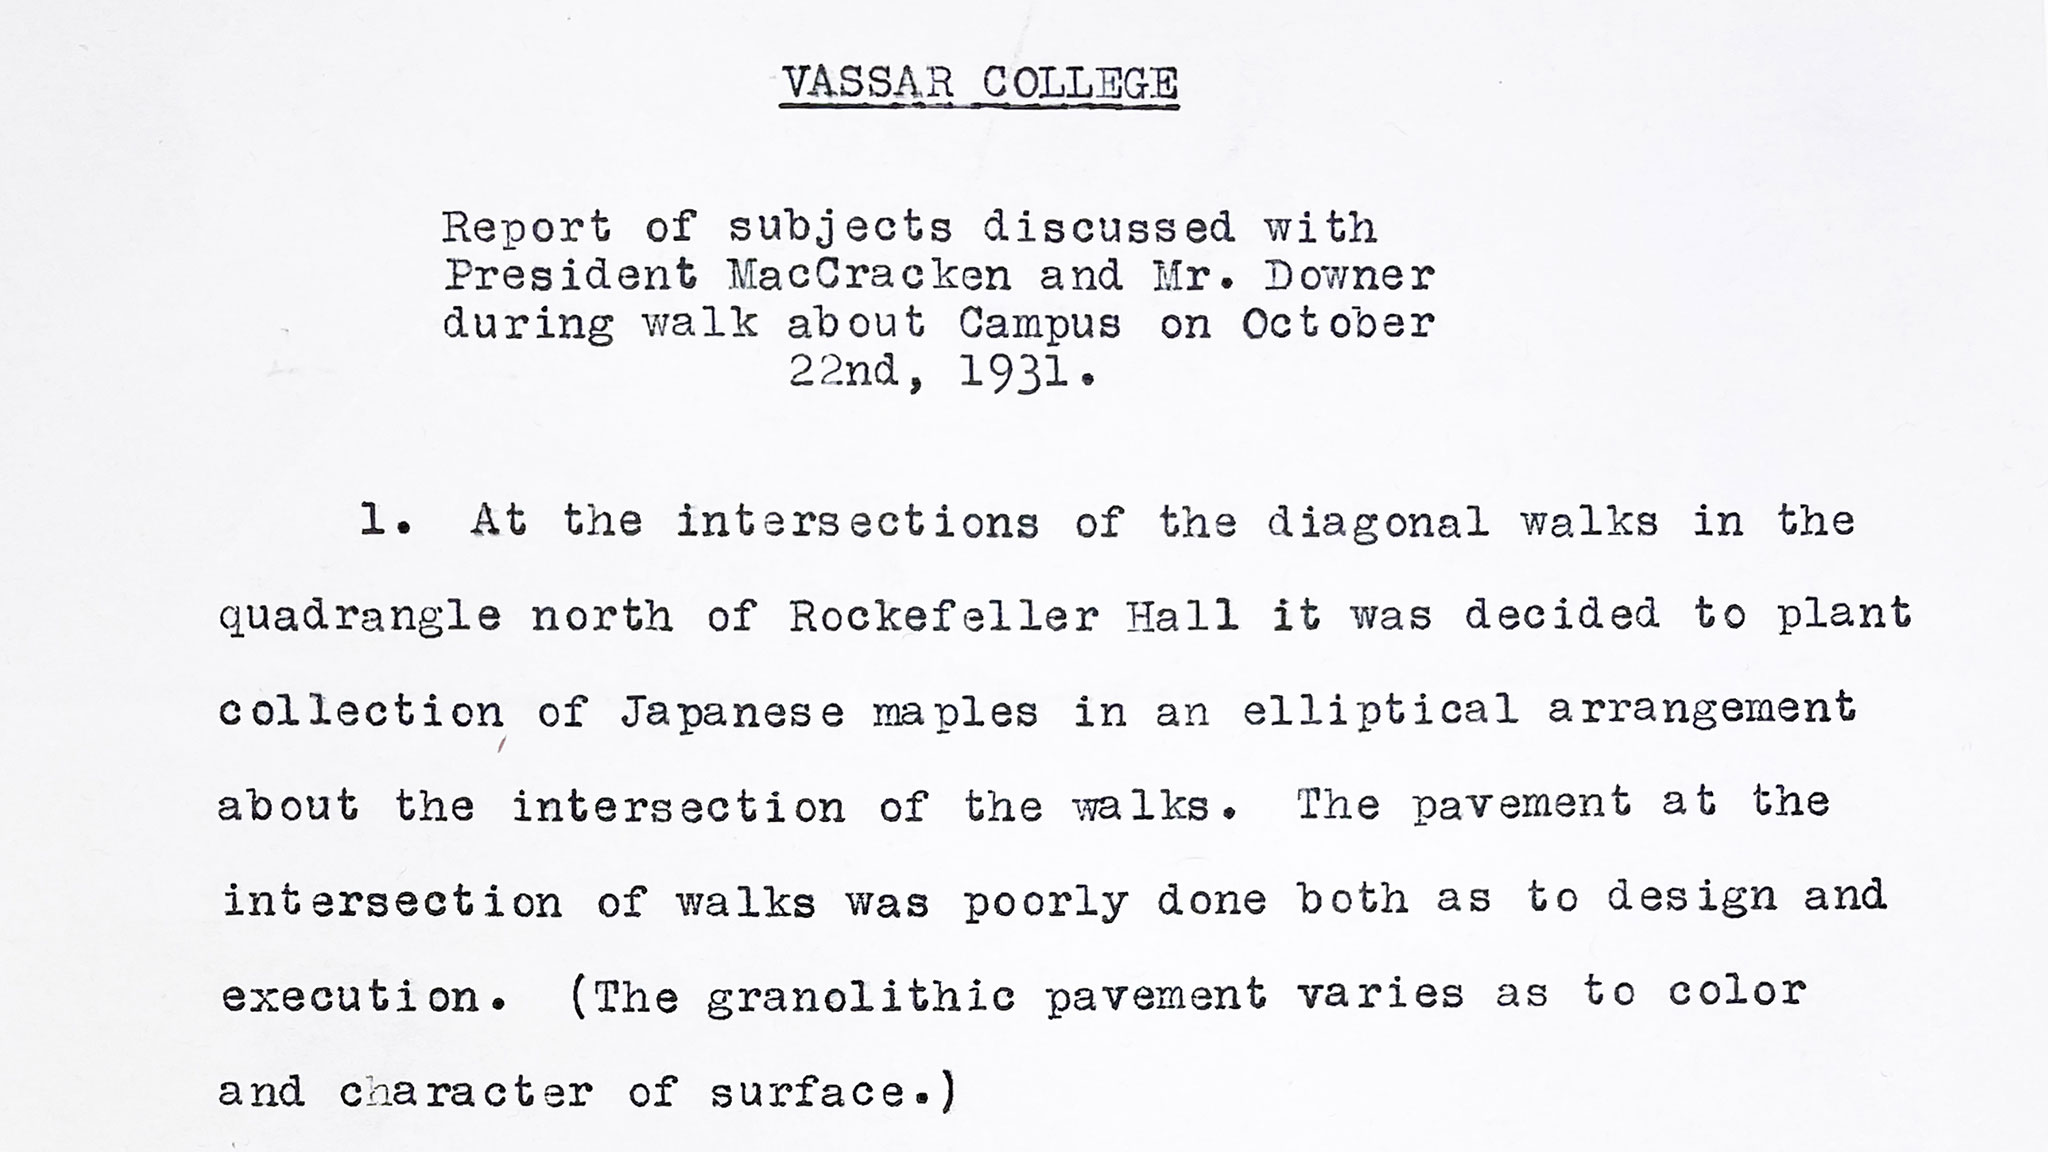 In a memo sent to Vassar, Olmsted landscape architect Percival Gallagher, Consulting Landscape Architect to the College, records his recommendations for the Japanese maples.